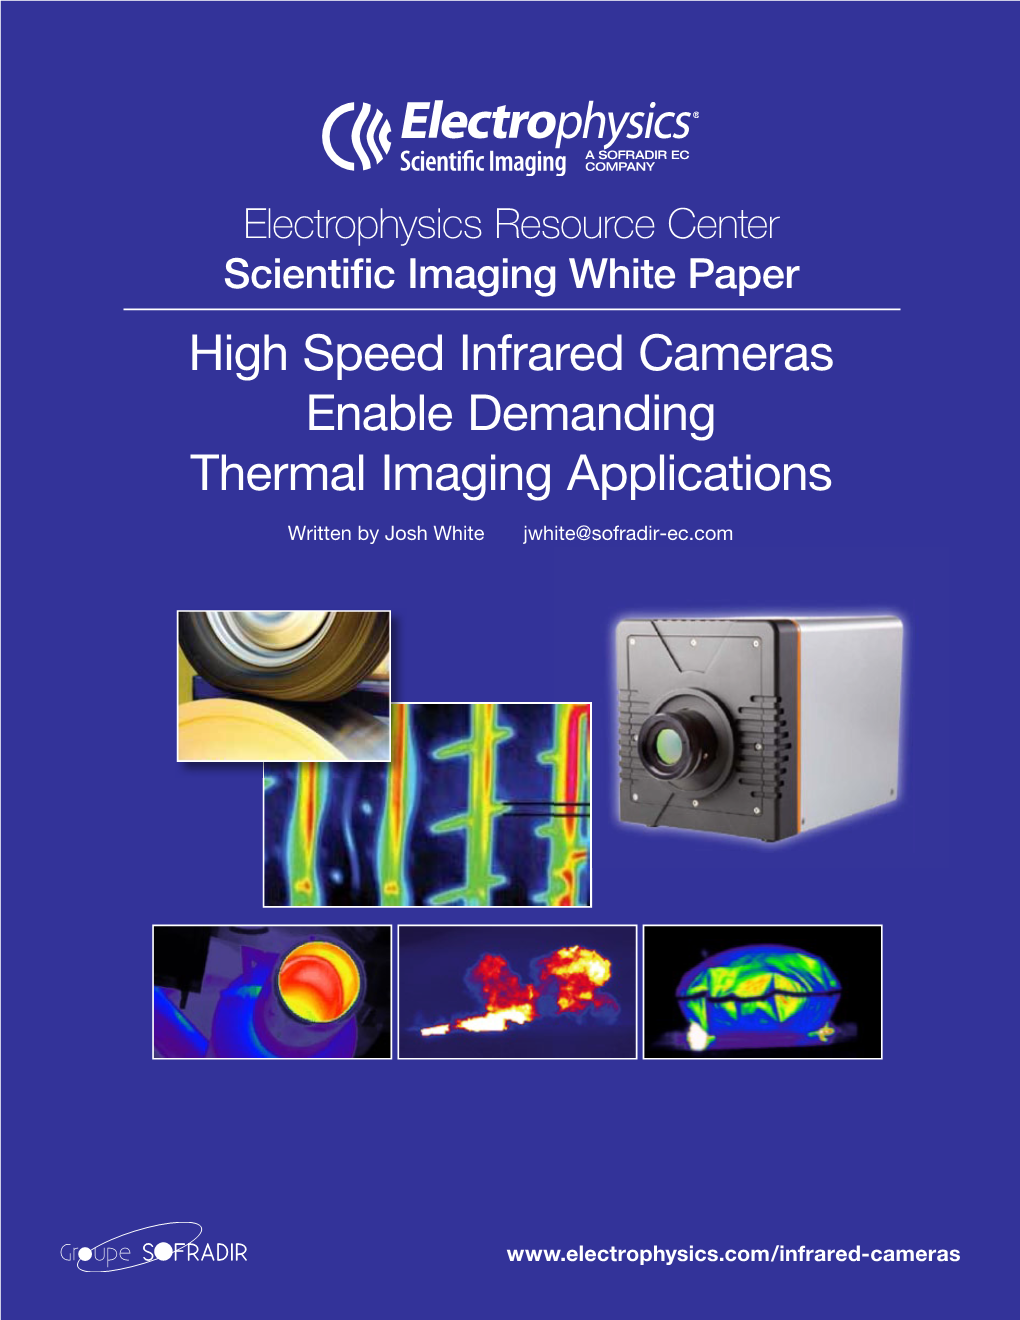 High Speed Infrared Cameras Enable Demanding Thermal Imaging Applications